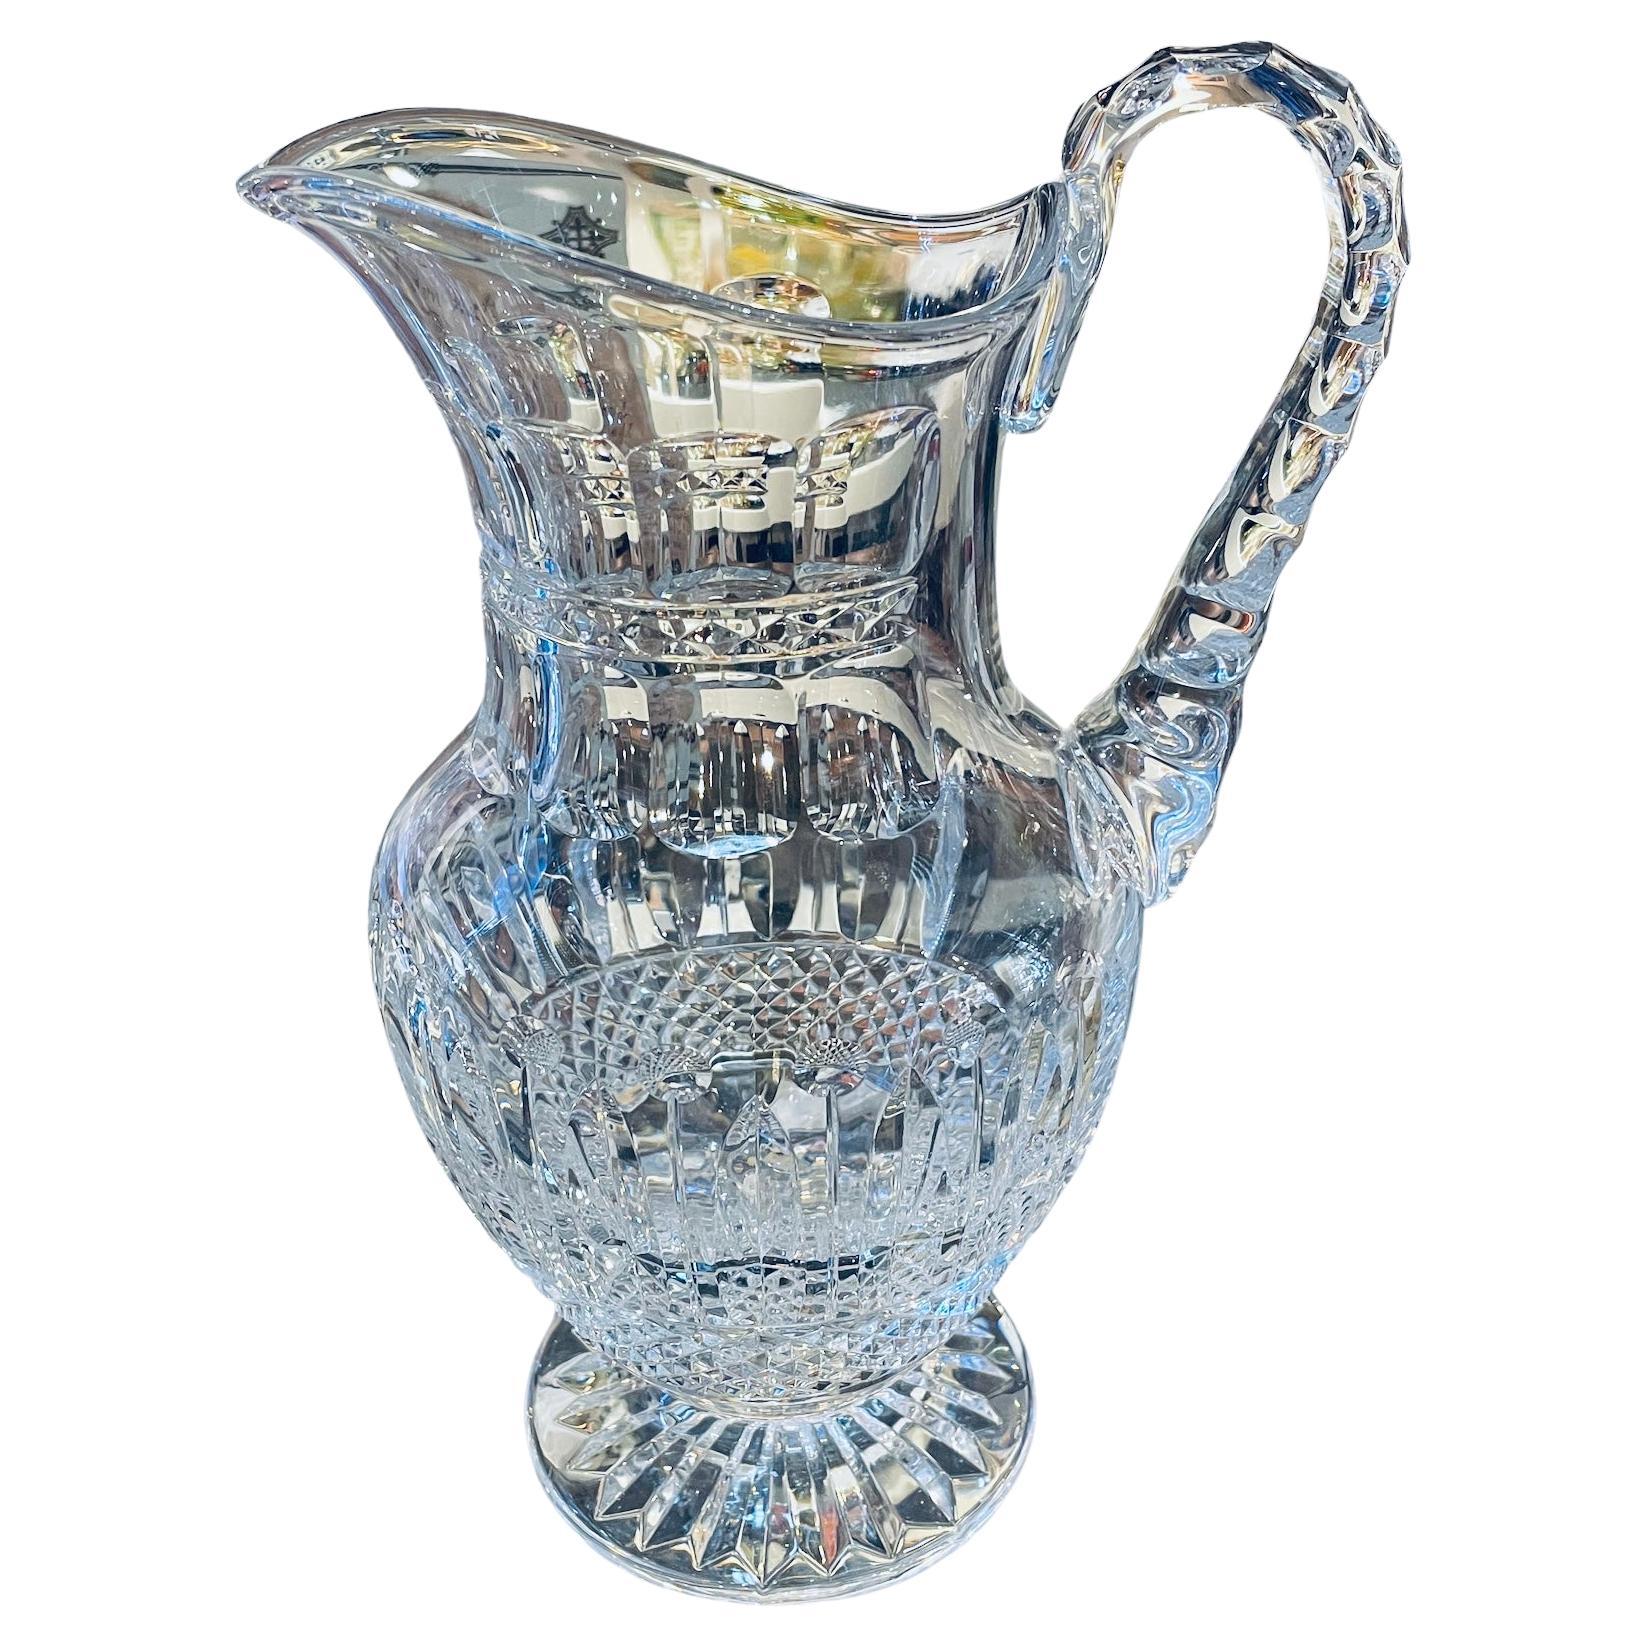 This is a Saint Louis Crystal Tommy pattern Water Jug with handle. It depict a clear crystal adorned with a cluster of diamonds cut pattern at the bottom of the body. Above it, there is a pattern made of feather like cut alternated with sticks with